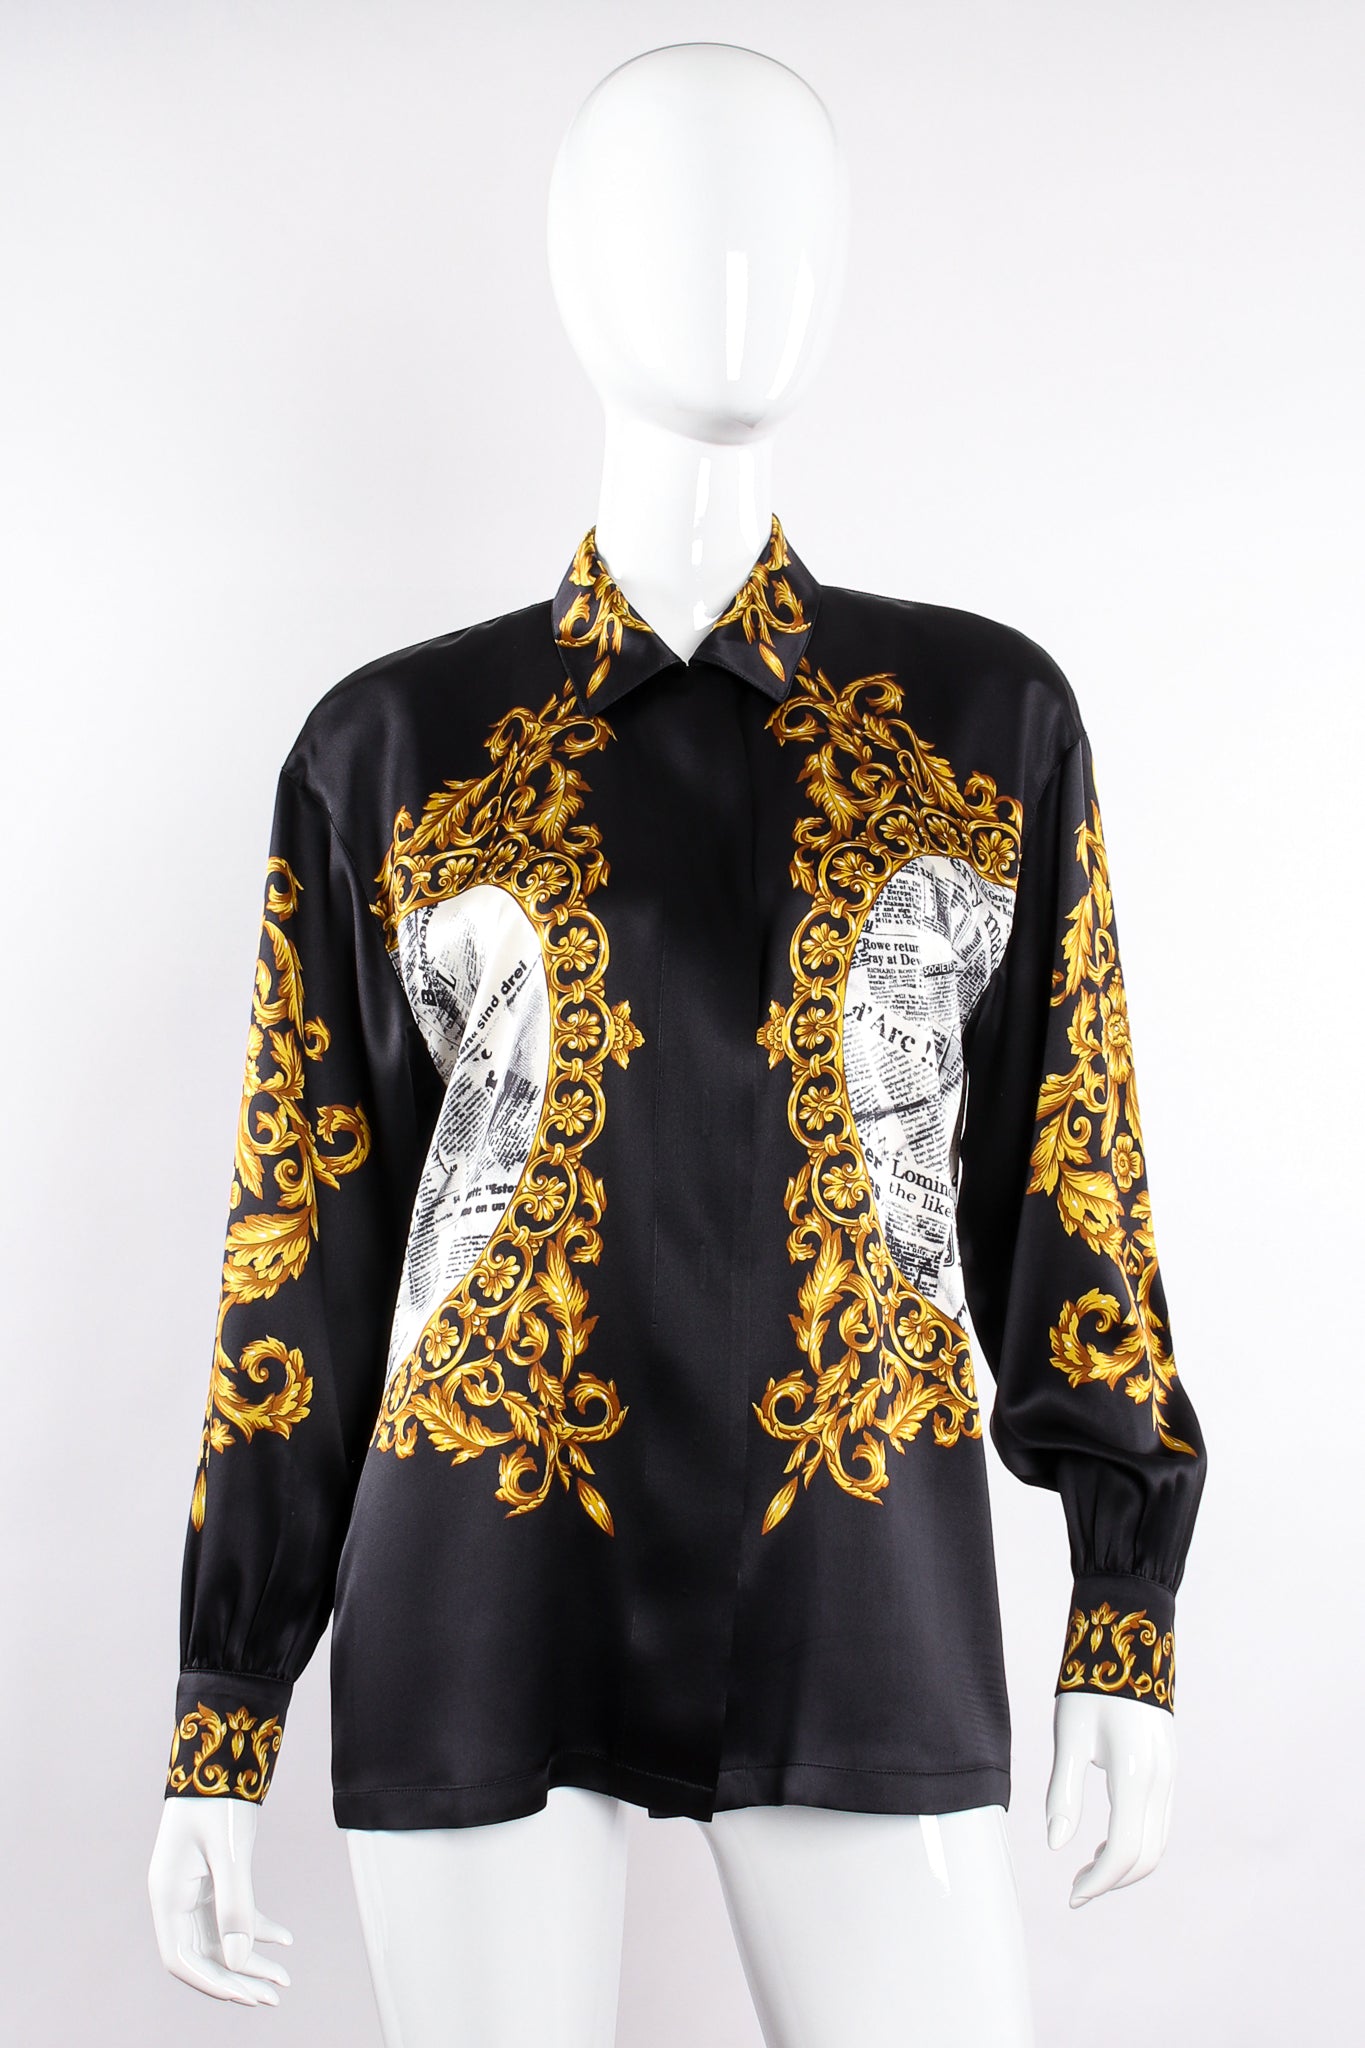 Vintage Escada Baroque Newspaper Print Shirt Galliano Inspired on Mannequin front at Recess LA